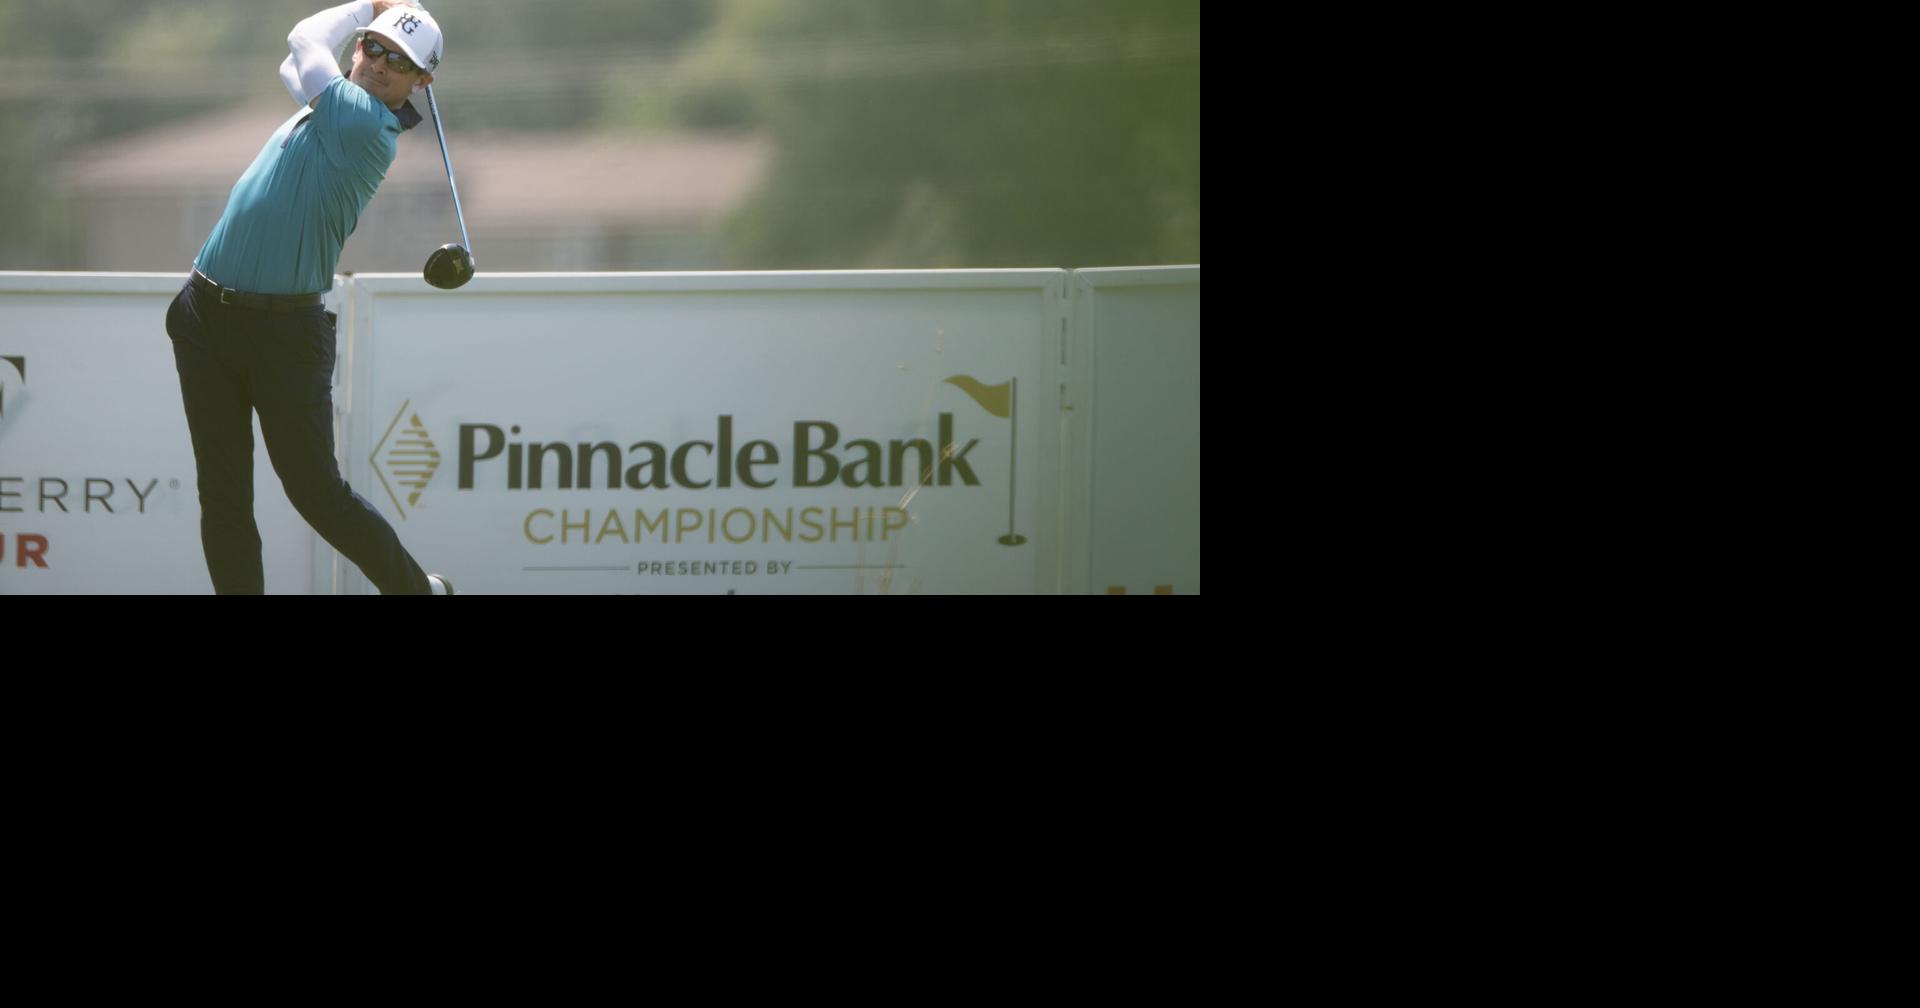 Pinnacle Bank Championship Will Be At Full Strength In 2022